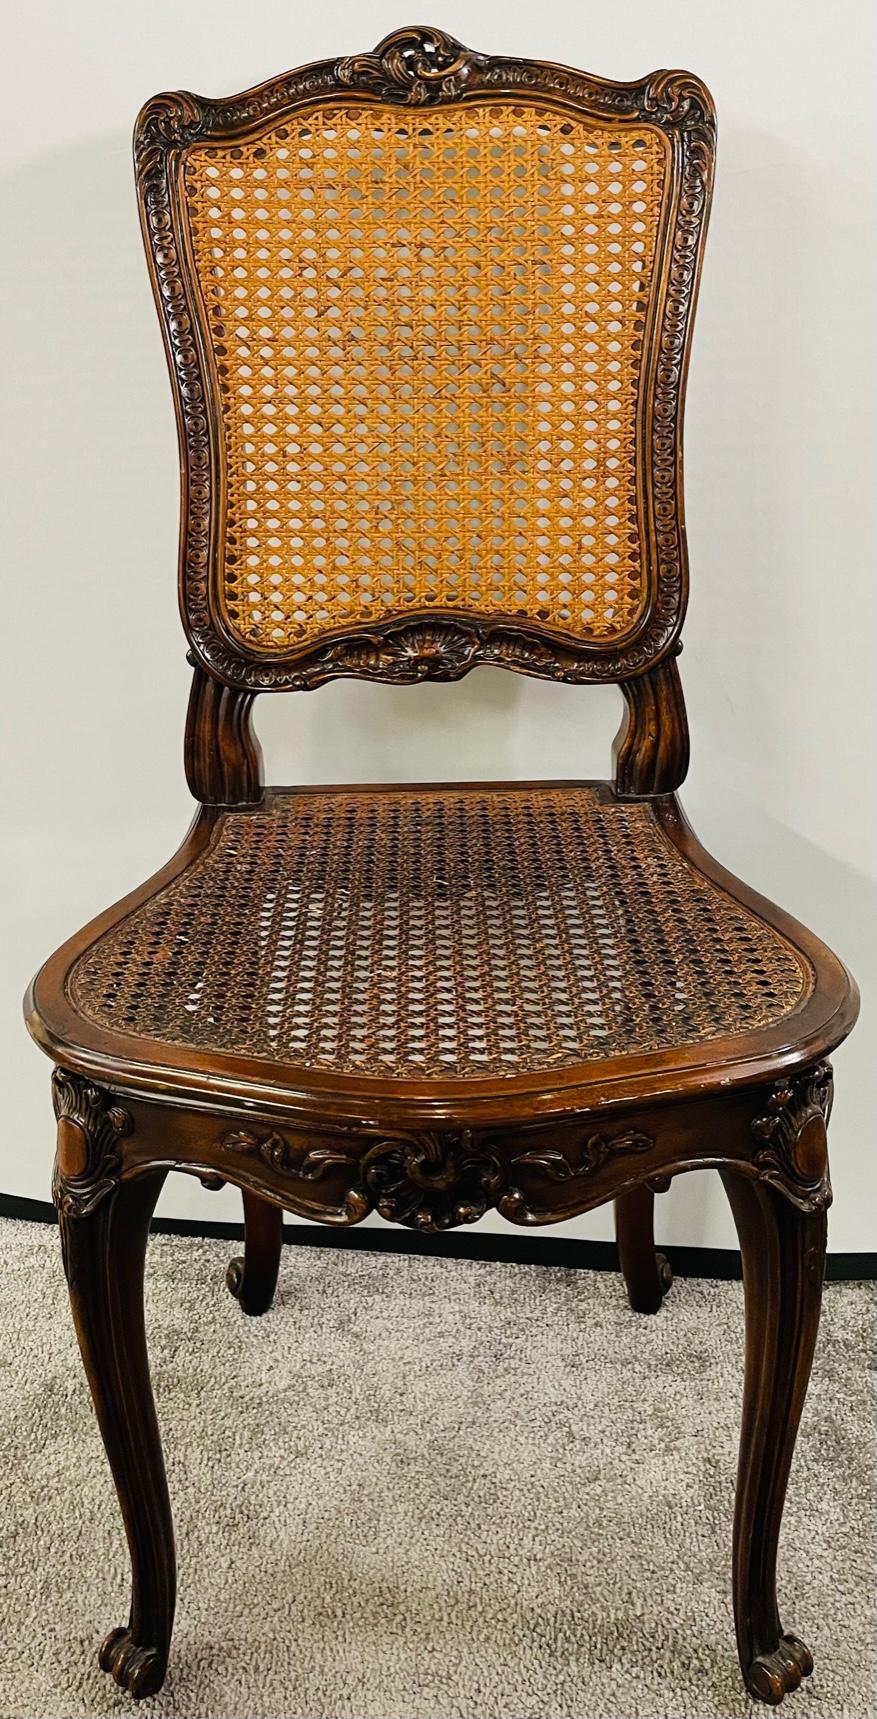 A set of 4 French Louis XV carved walnut side chairs featuring a caned back and seat , the former in light tone, the latter in darker tone. The chairs are hand carved of quality walnut wood in curvy design with flowers and scroll design embellishing